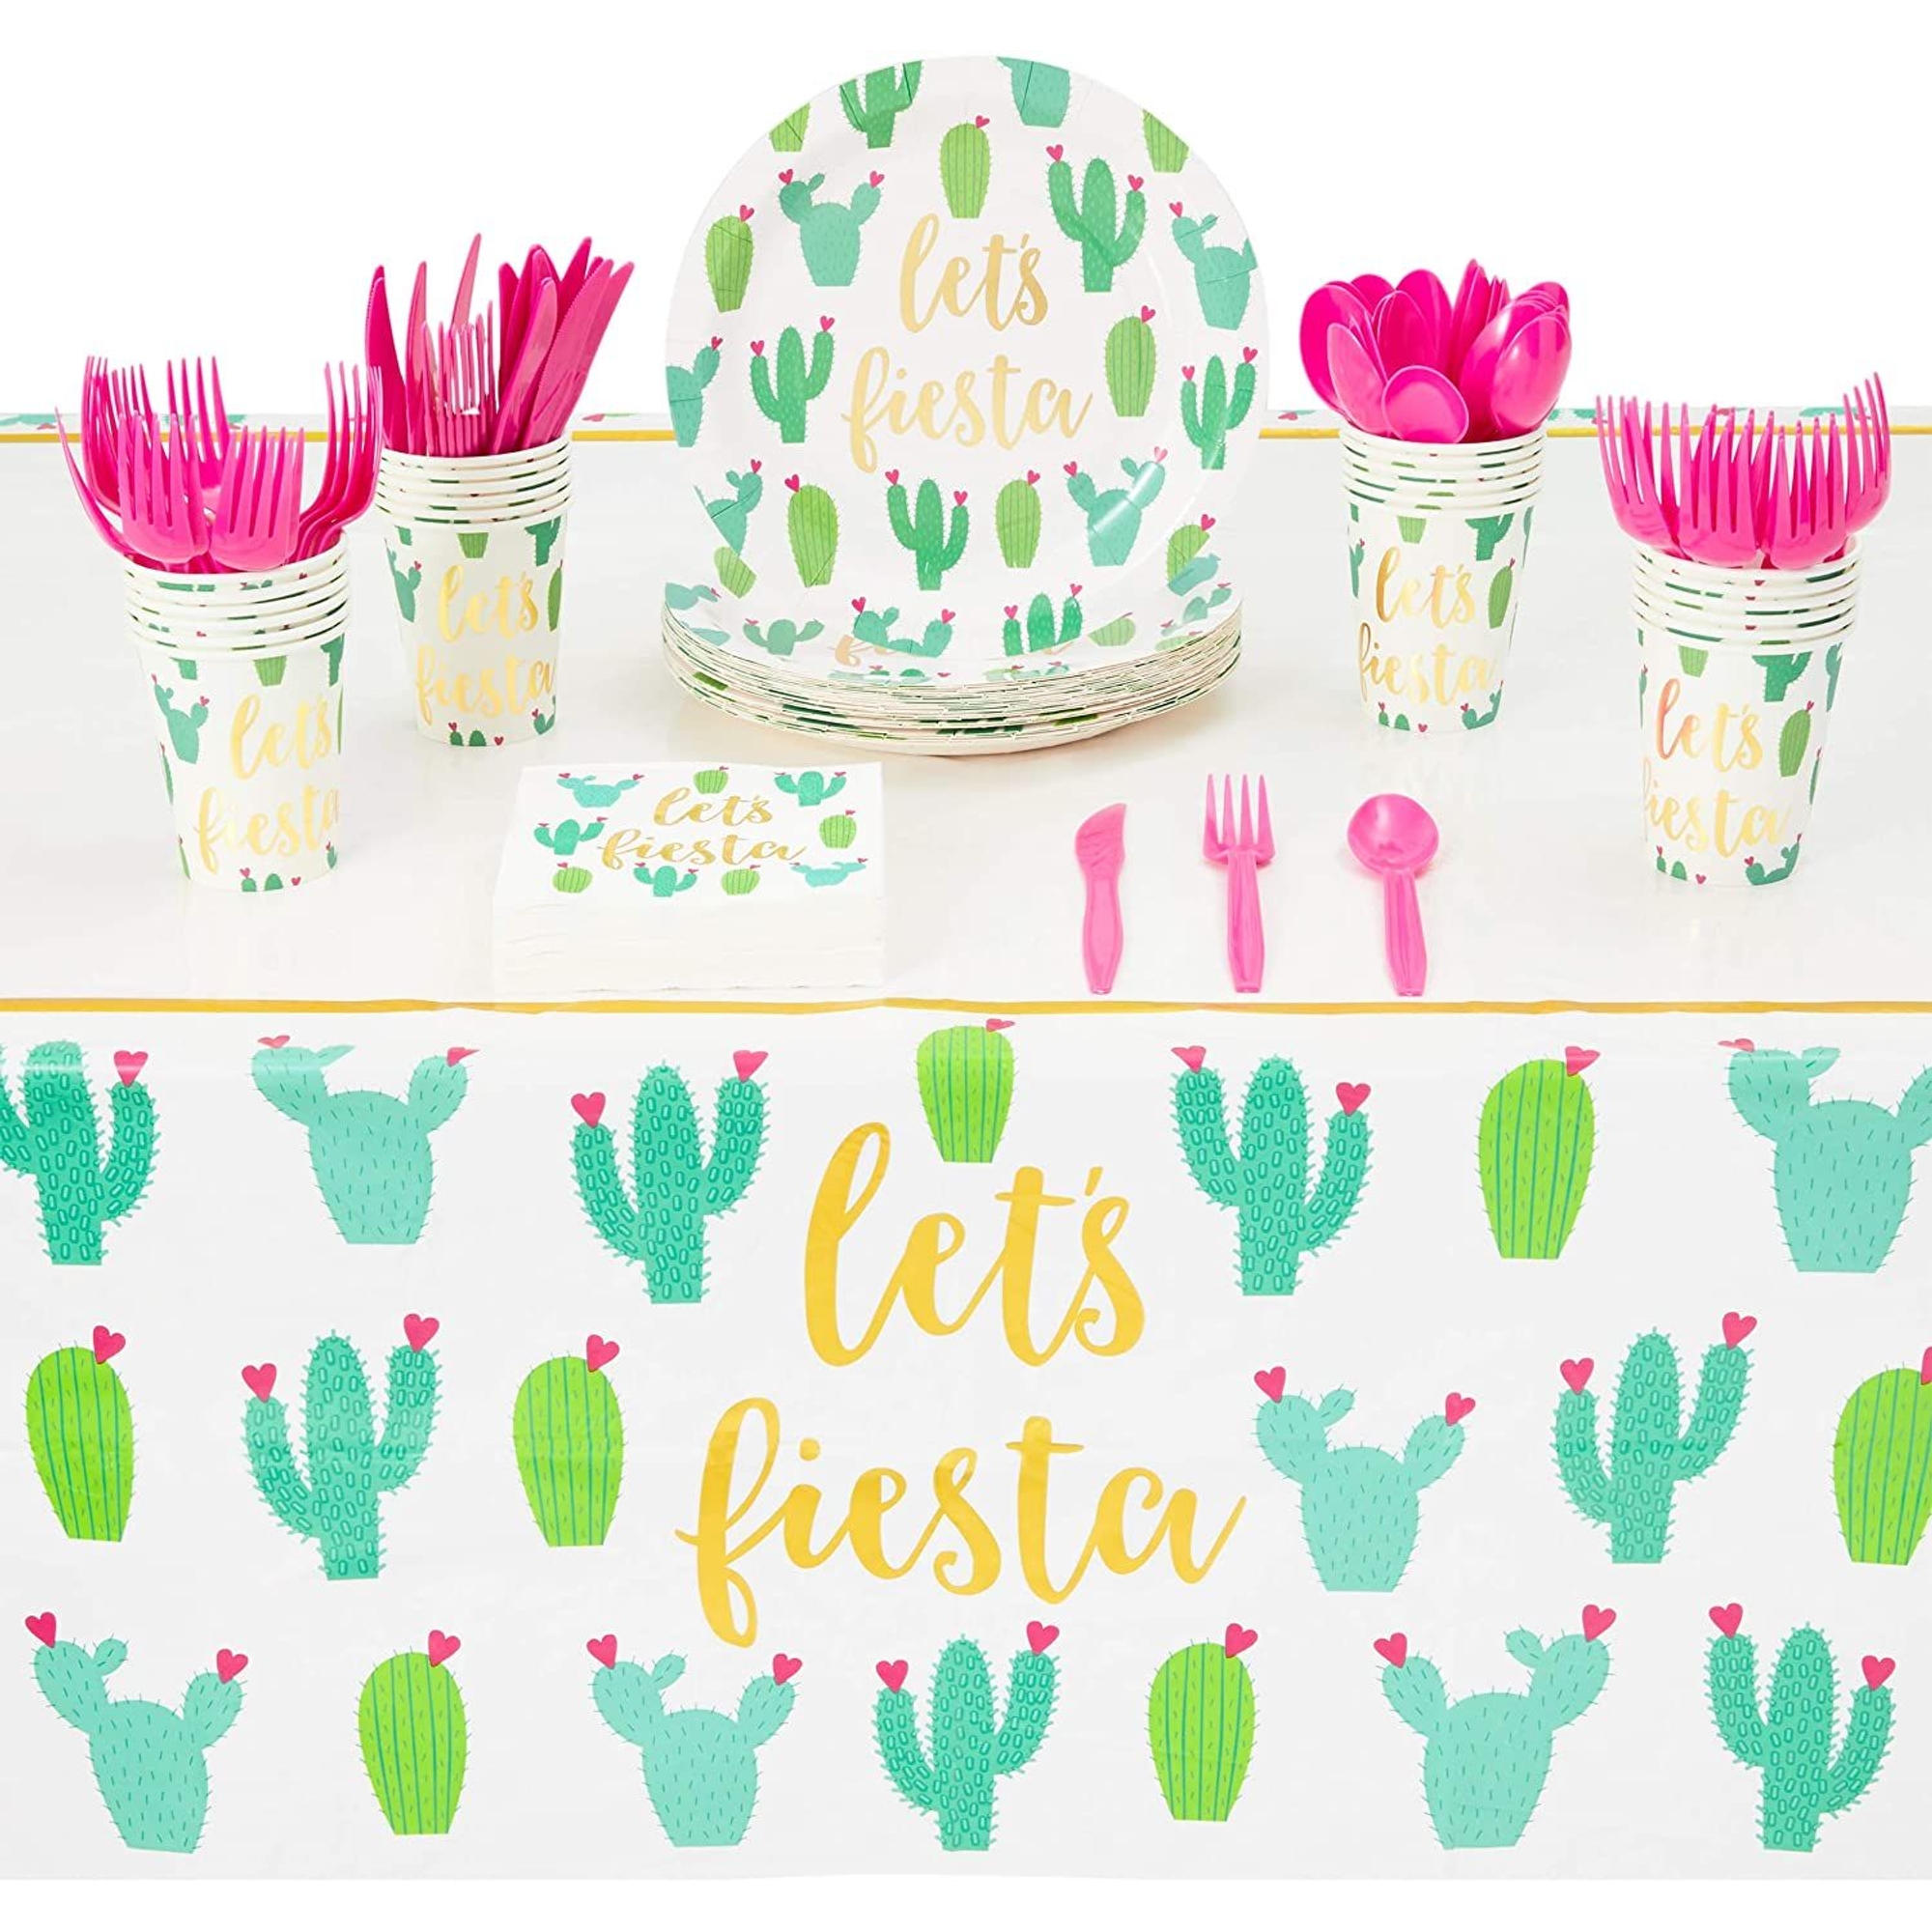 145 Pieces Let's Fiesta Party Supplies, Cactus Plates, Napkins, Cups,  Cutlery, Tablecloth for Birthday, Bachelorette Decorations (Serves 24)